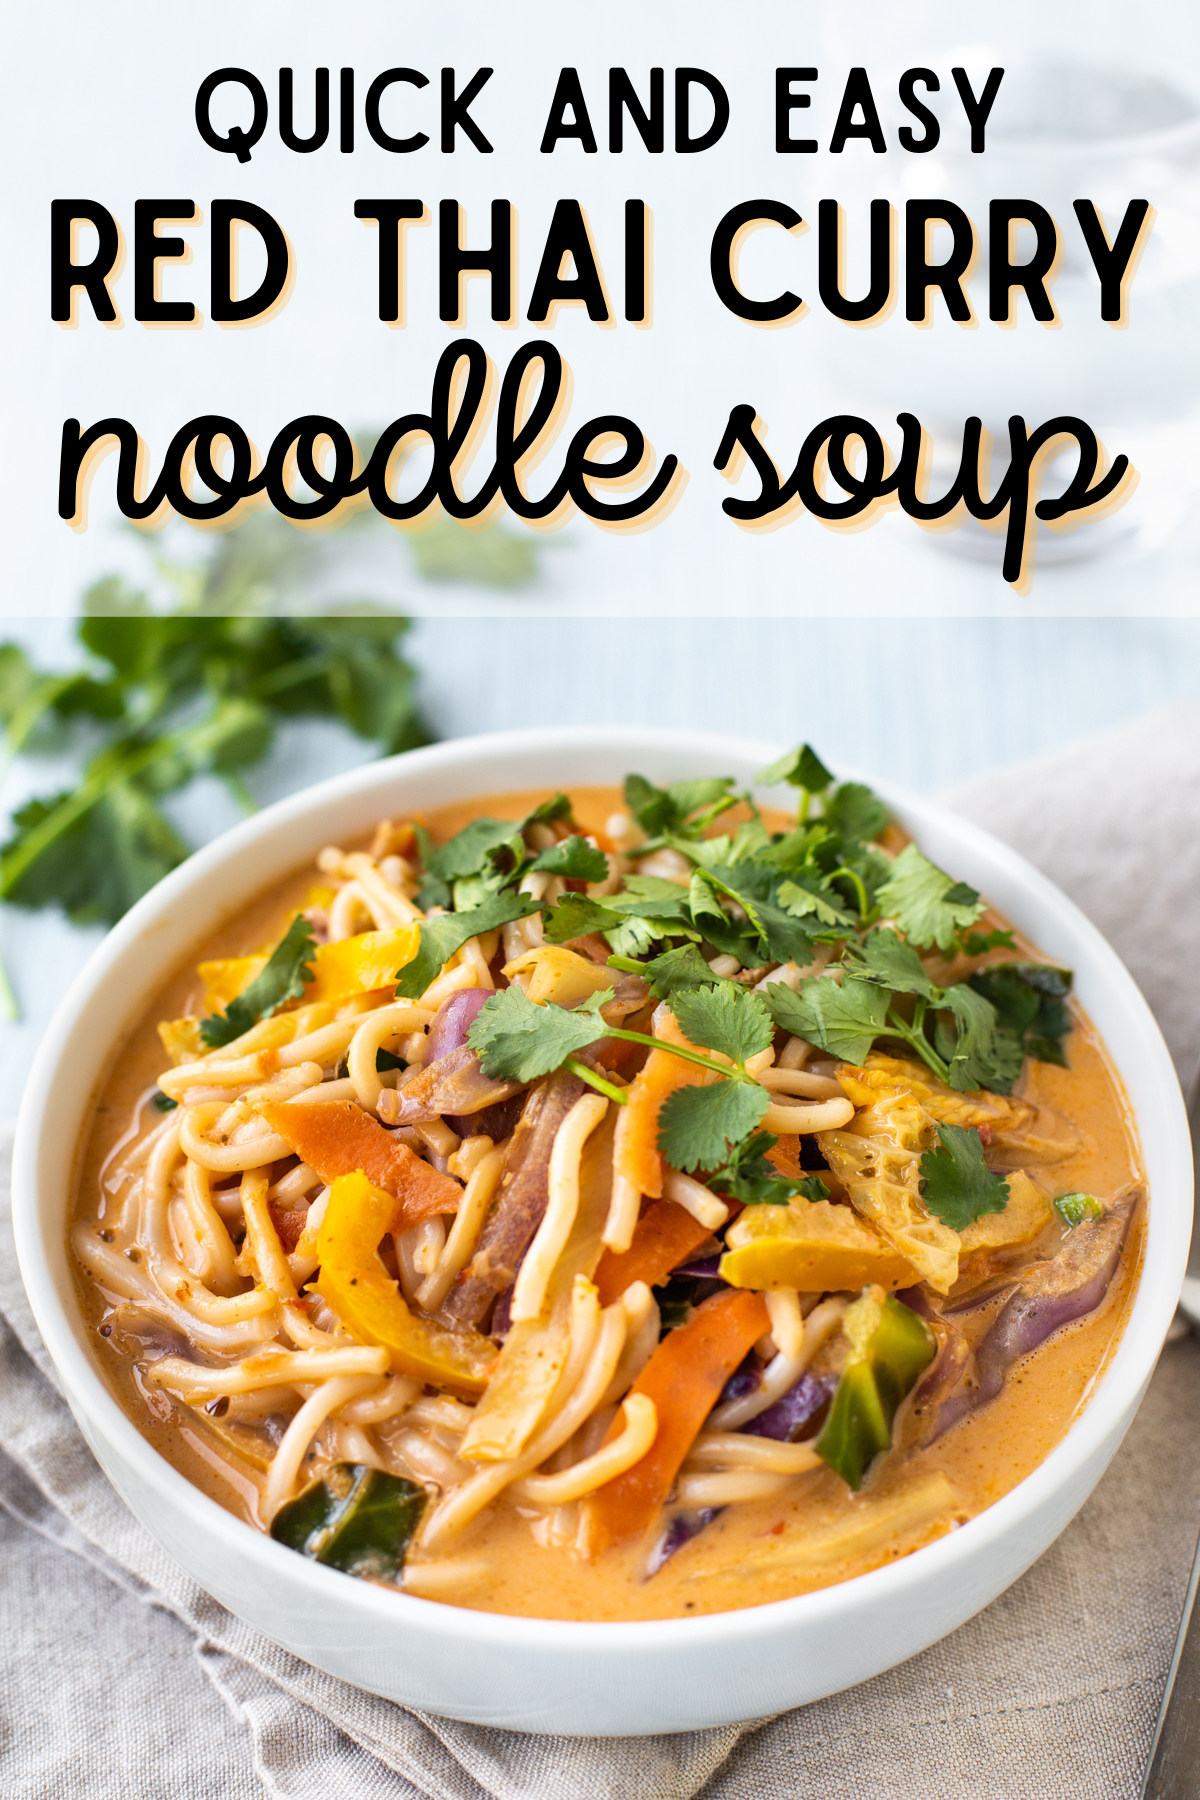 A bowl of Thai curry noodle soup with a text overlay.